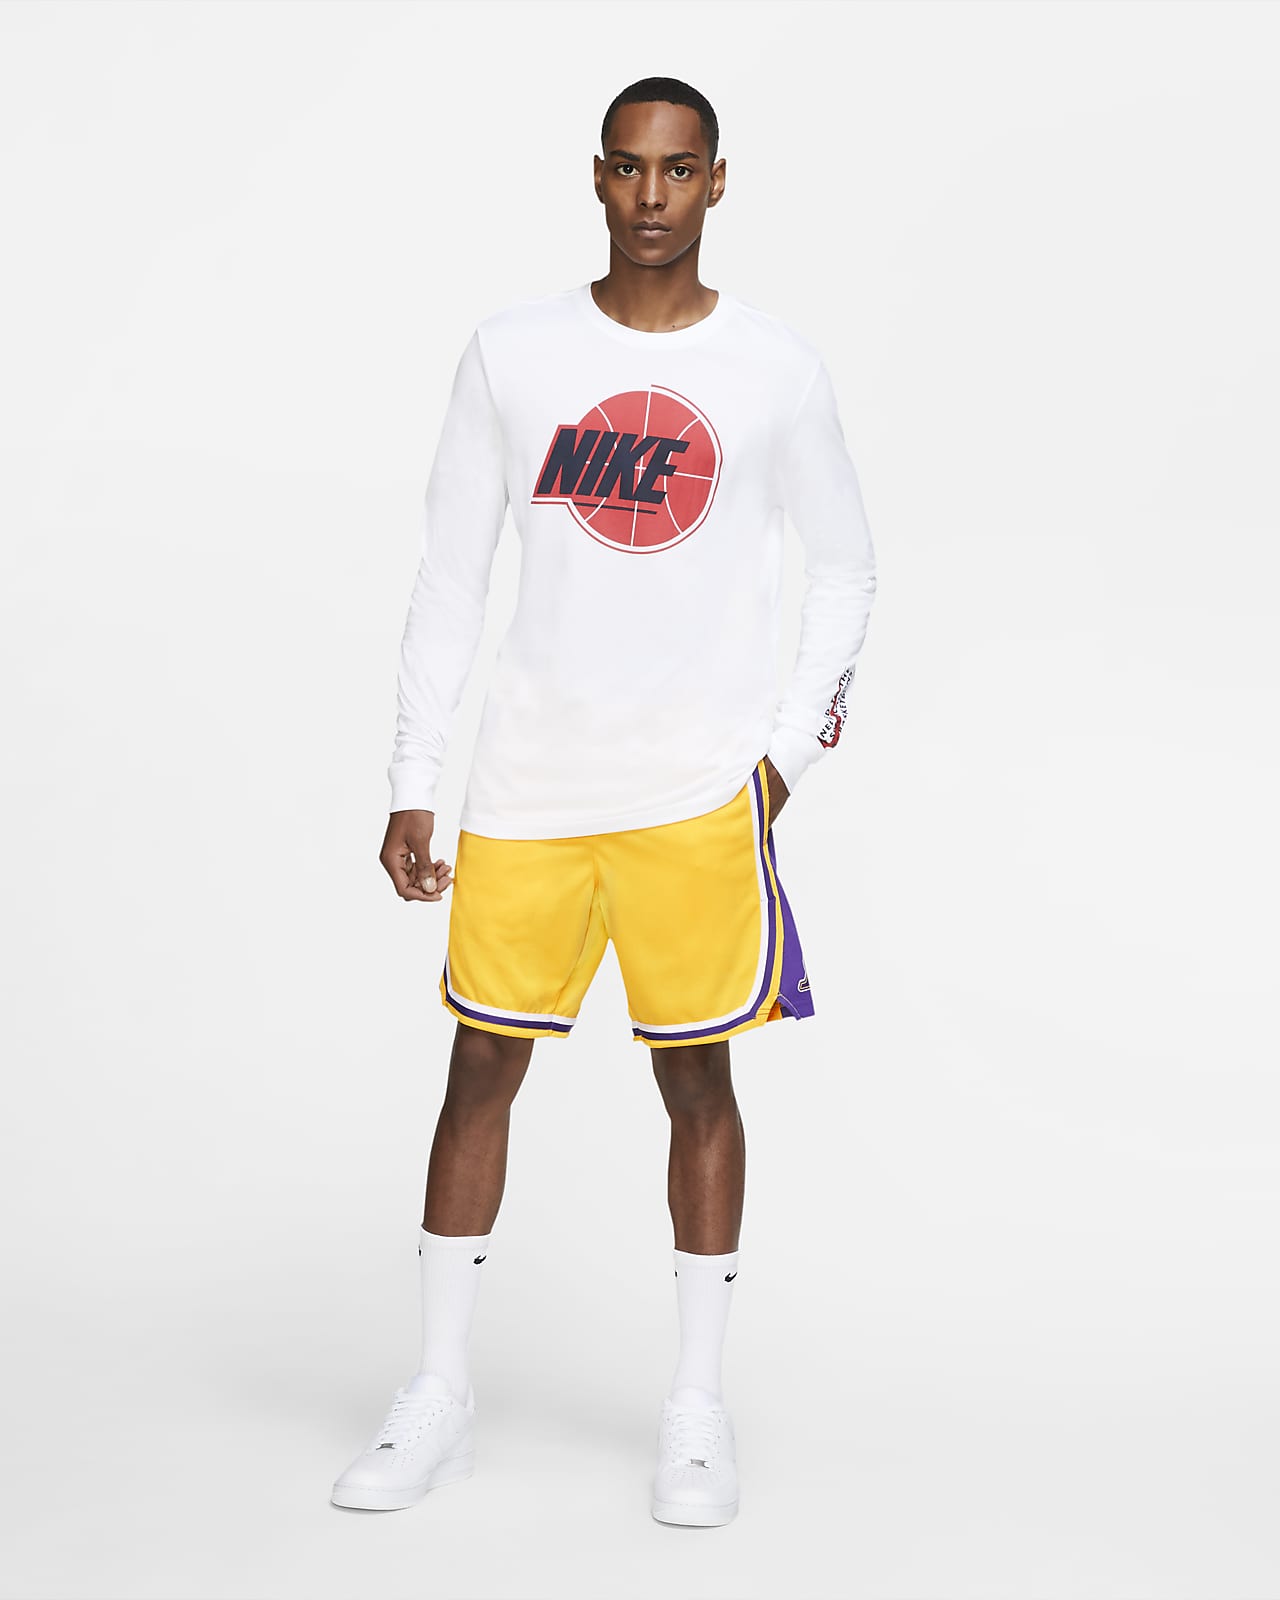 lakers standard issue shorts